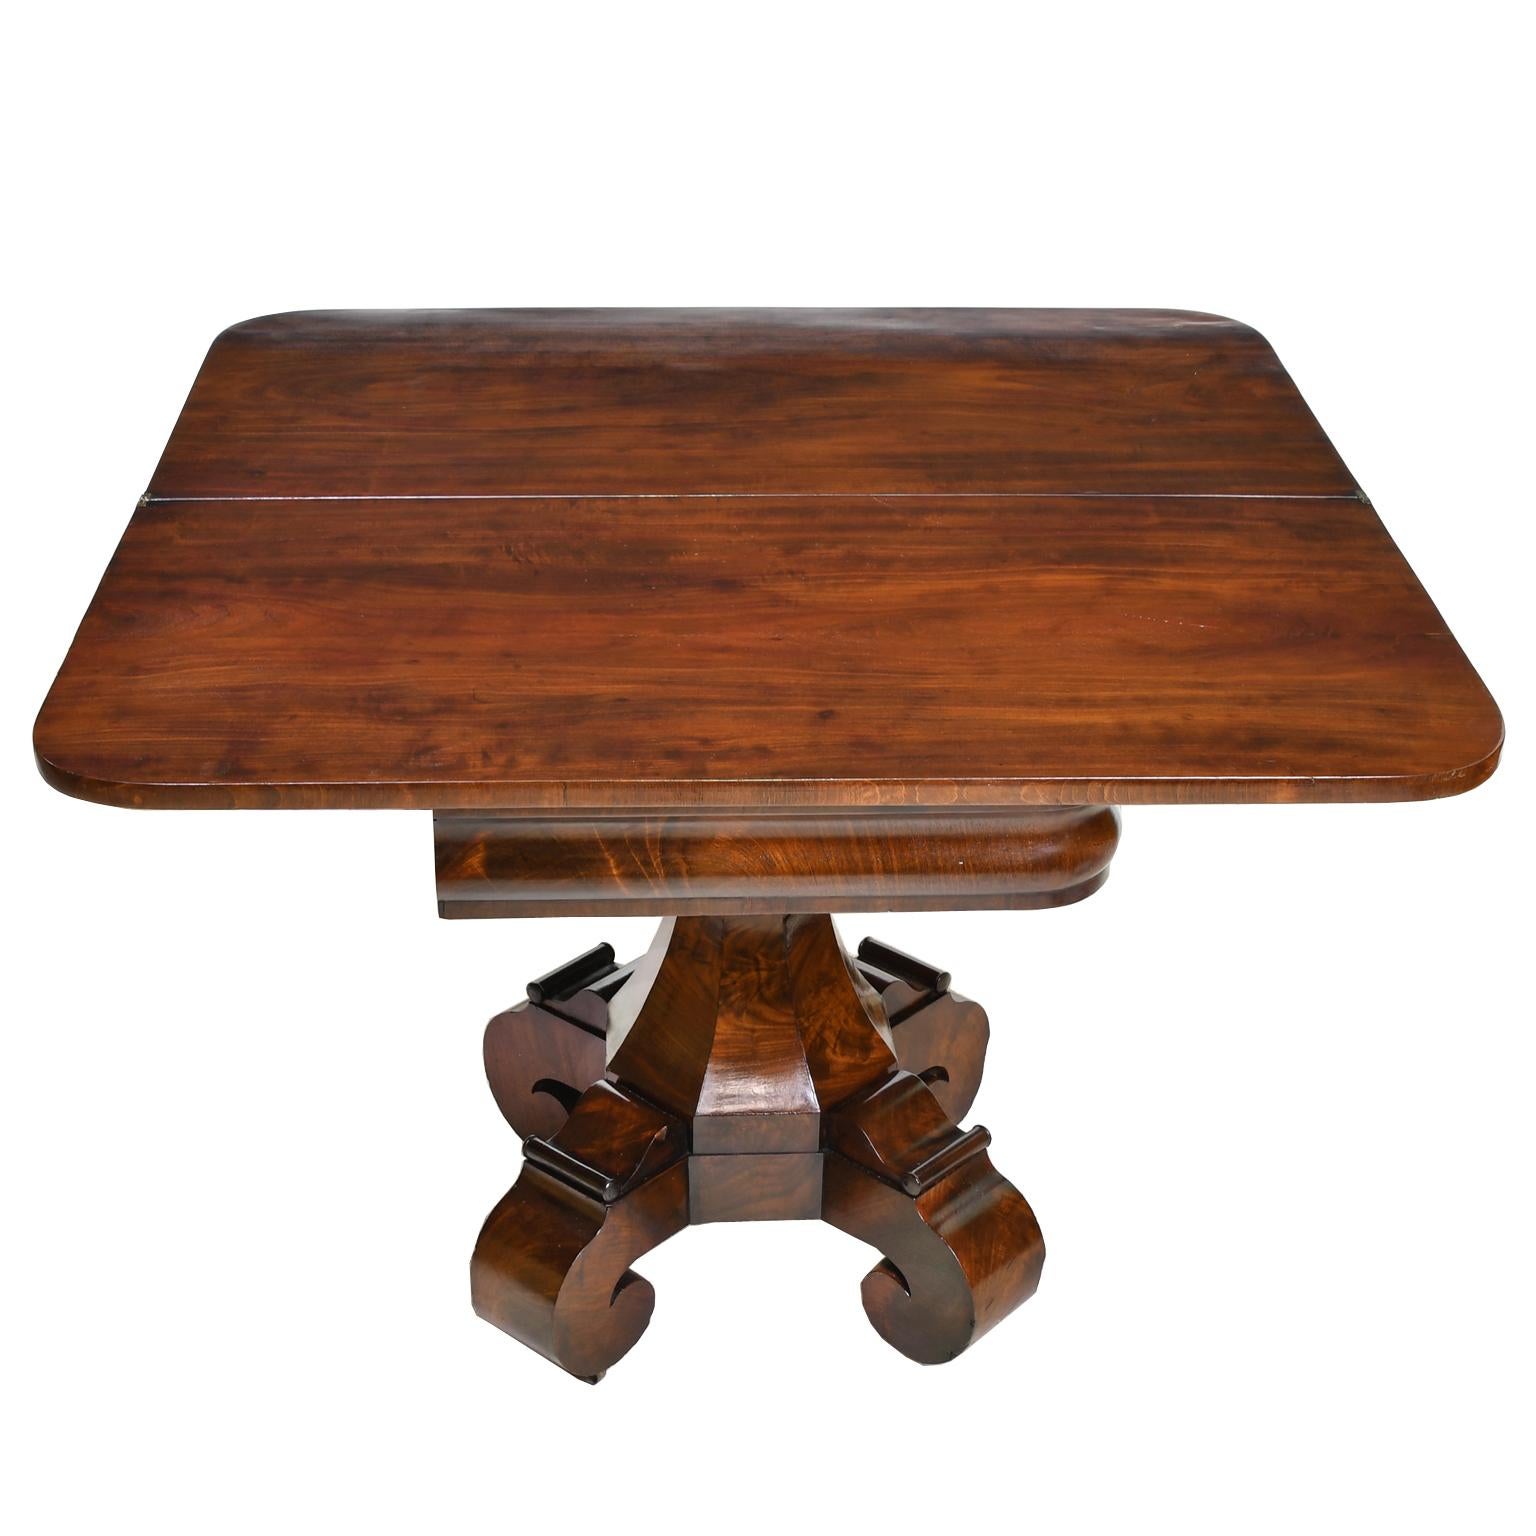 An exquisite classical American empire card or games table in fine West Indies/ Cuban mahogany in the Grecian-style with octagonal support column resting on quatre-form pedestal base with scrolled feet. Th hinged rectangular top turns & opens to a